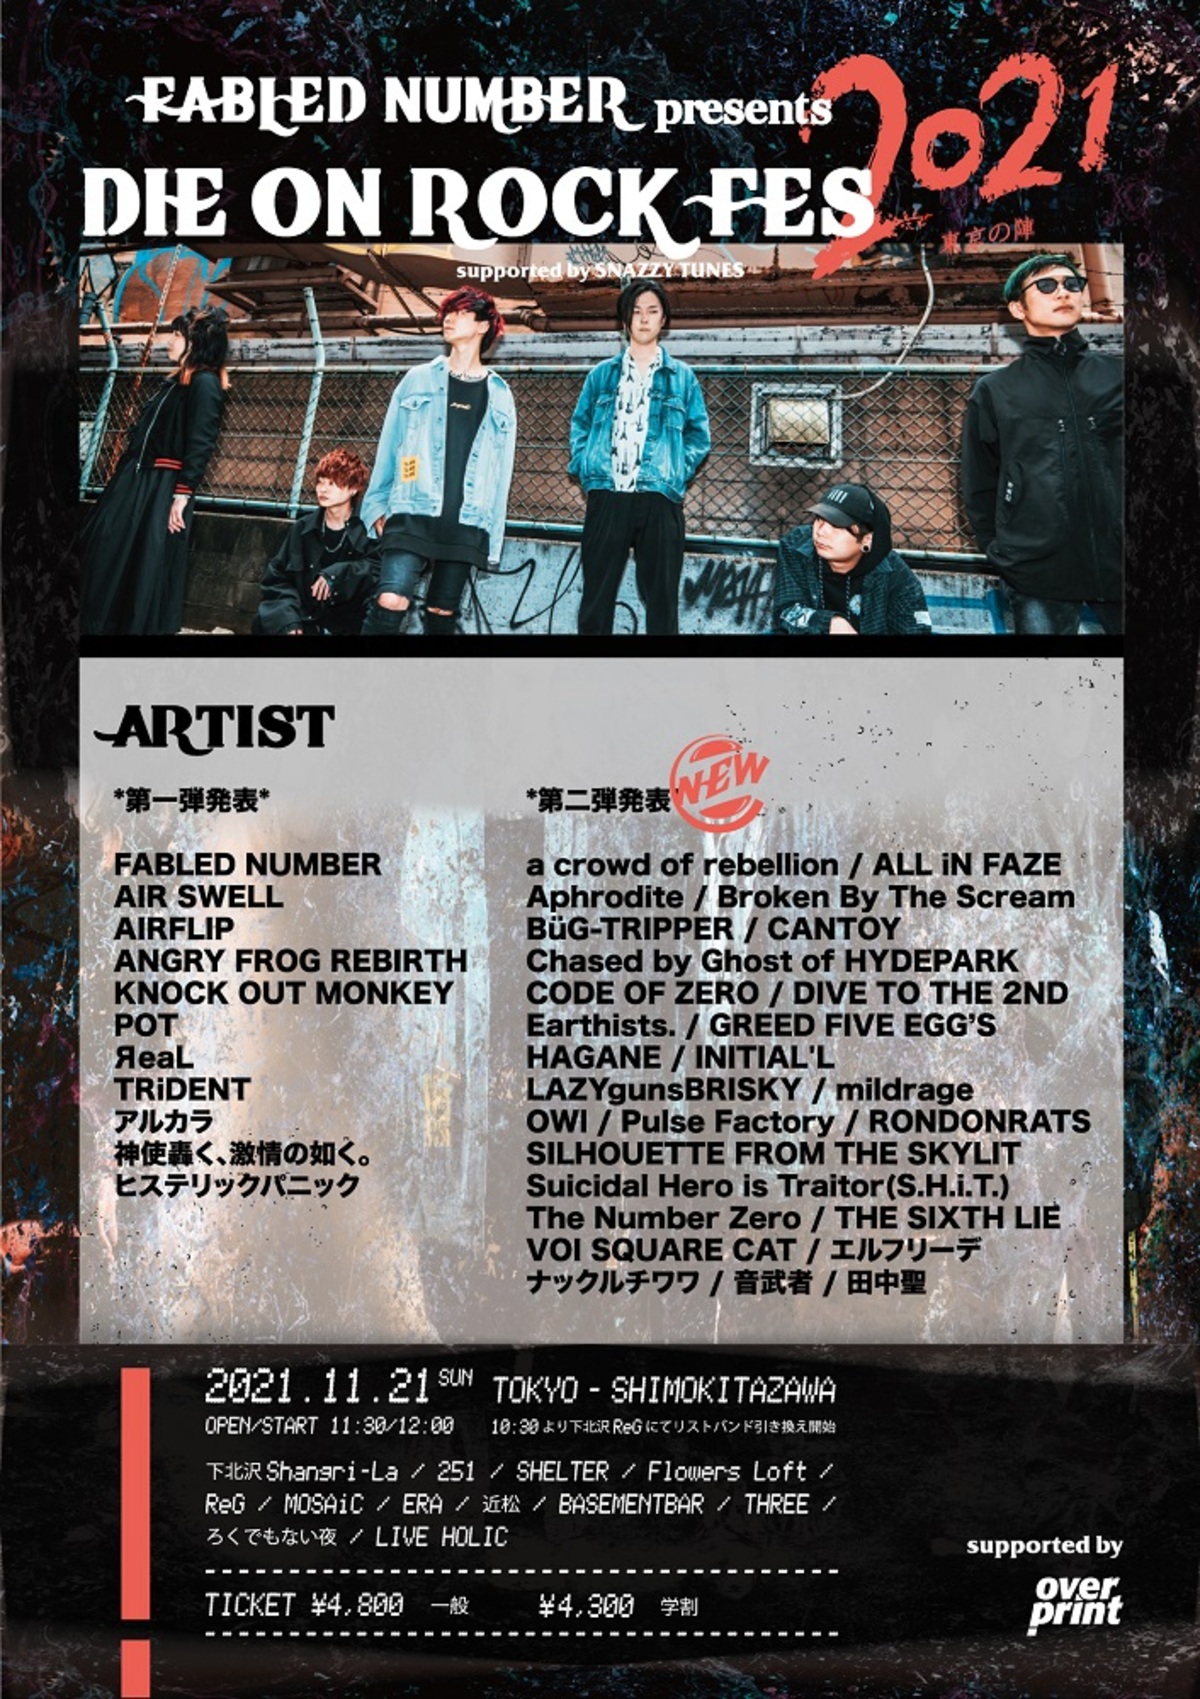 Fabled Number主催サーキット イベント Die On Rock Fes 第2弾出演者でリベリオン Initial L 田中 聖 ts Earthists Hagane チェイスドら27組発表 激ロック ニュース